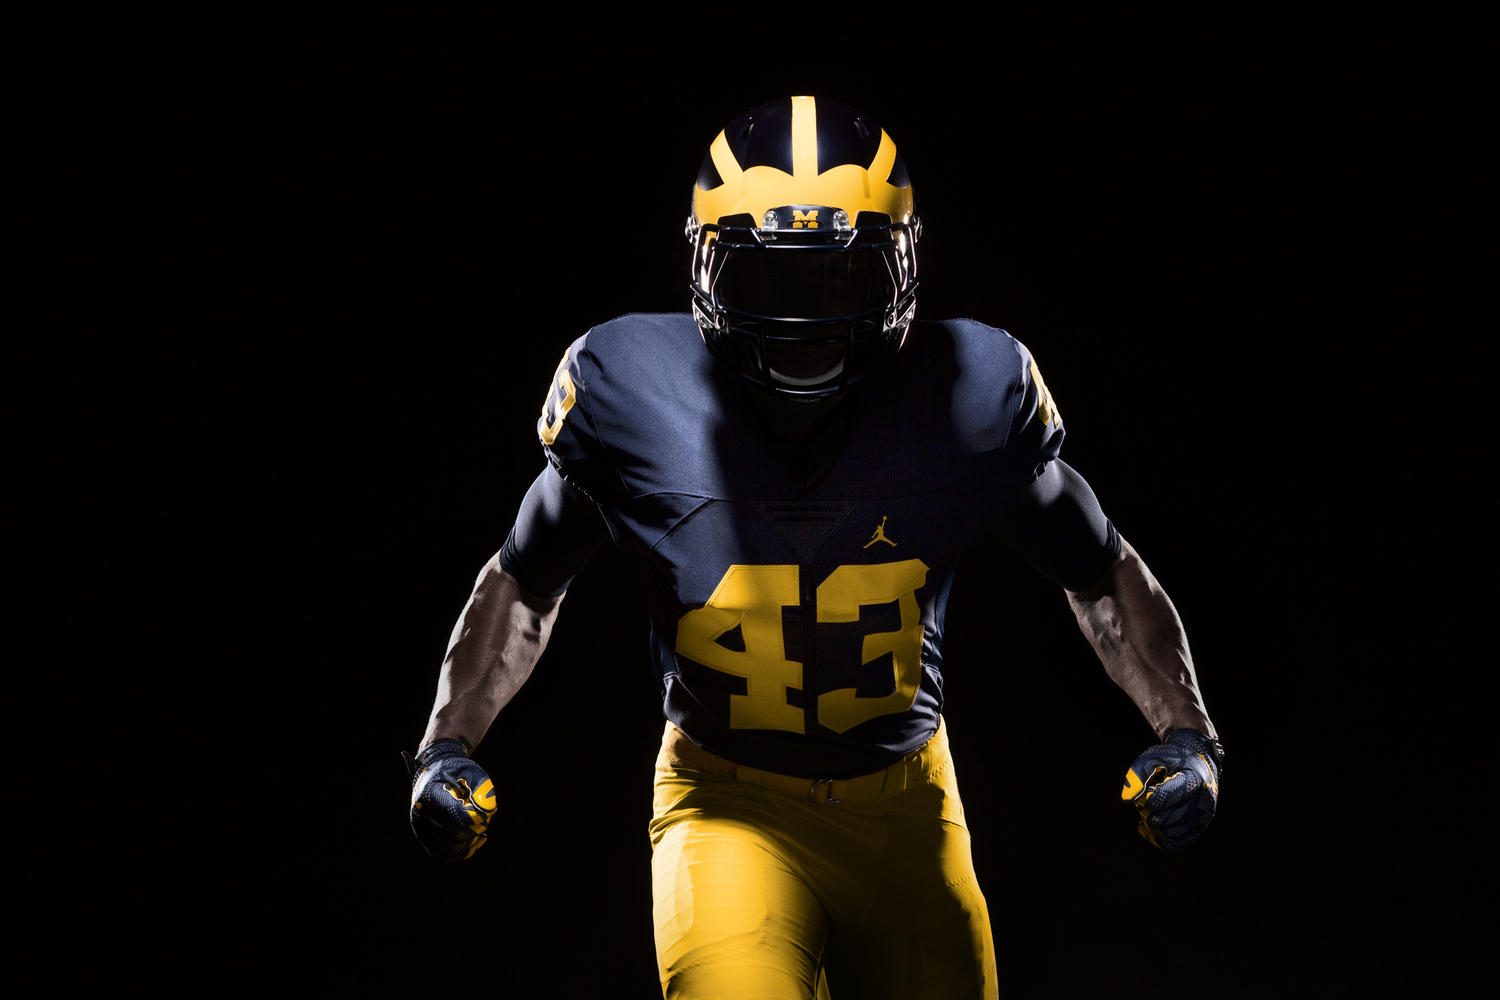 More Pictures Released Of Michigan's New Jordan Brand Football Uniforms1500 x 1000